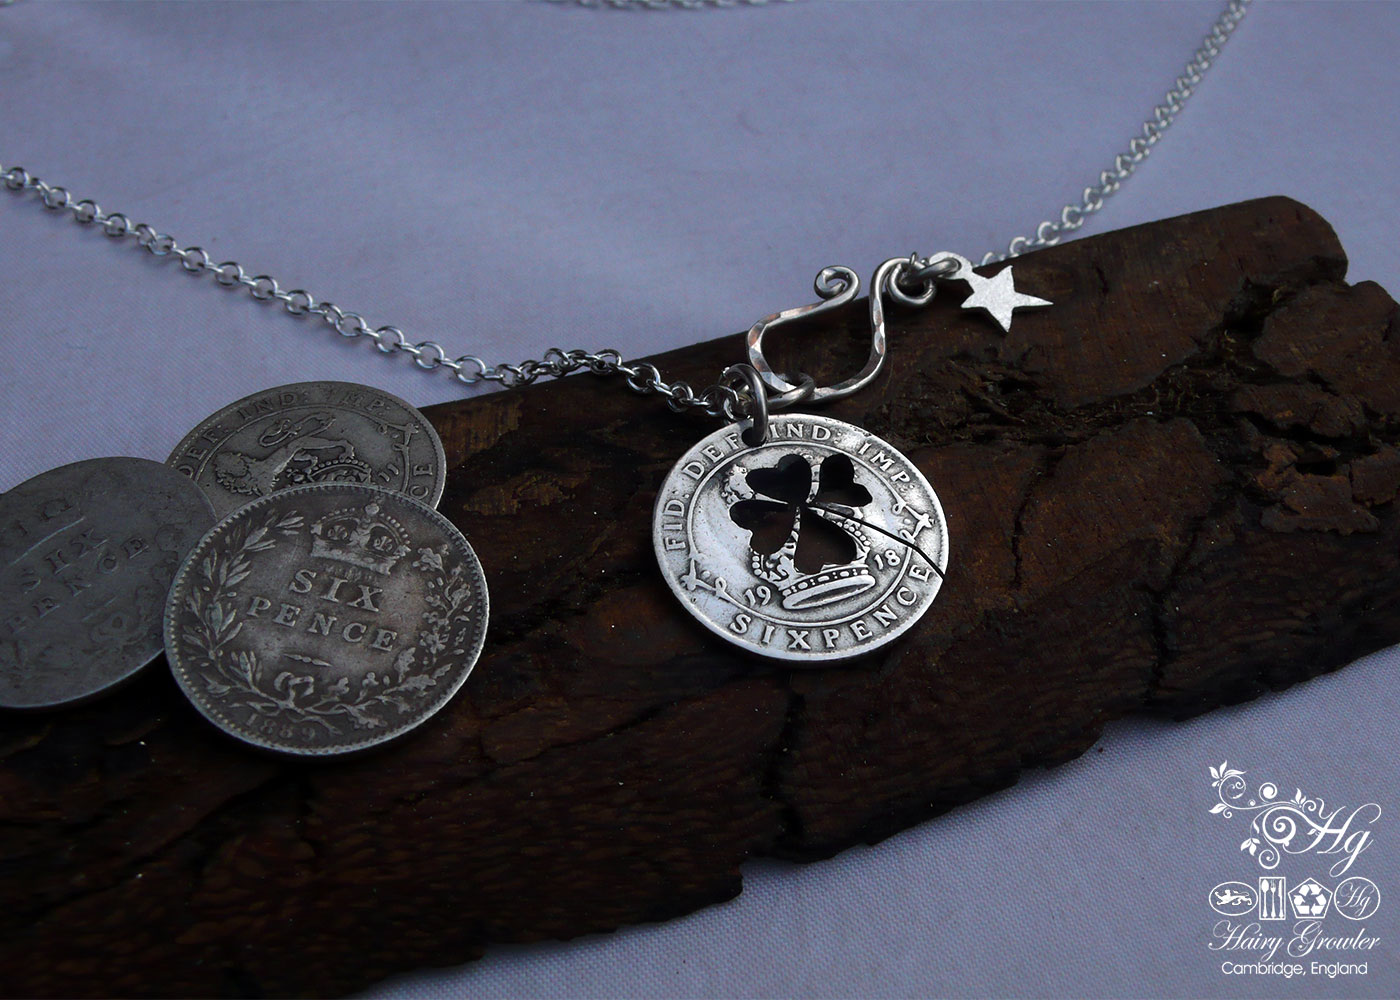 Handmade and repurposed lucky silver sixpence coin necklace pendant